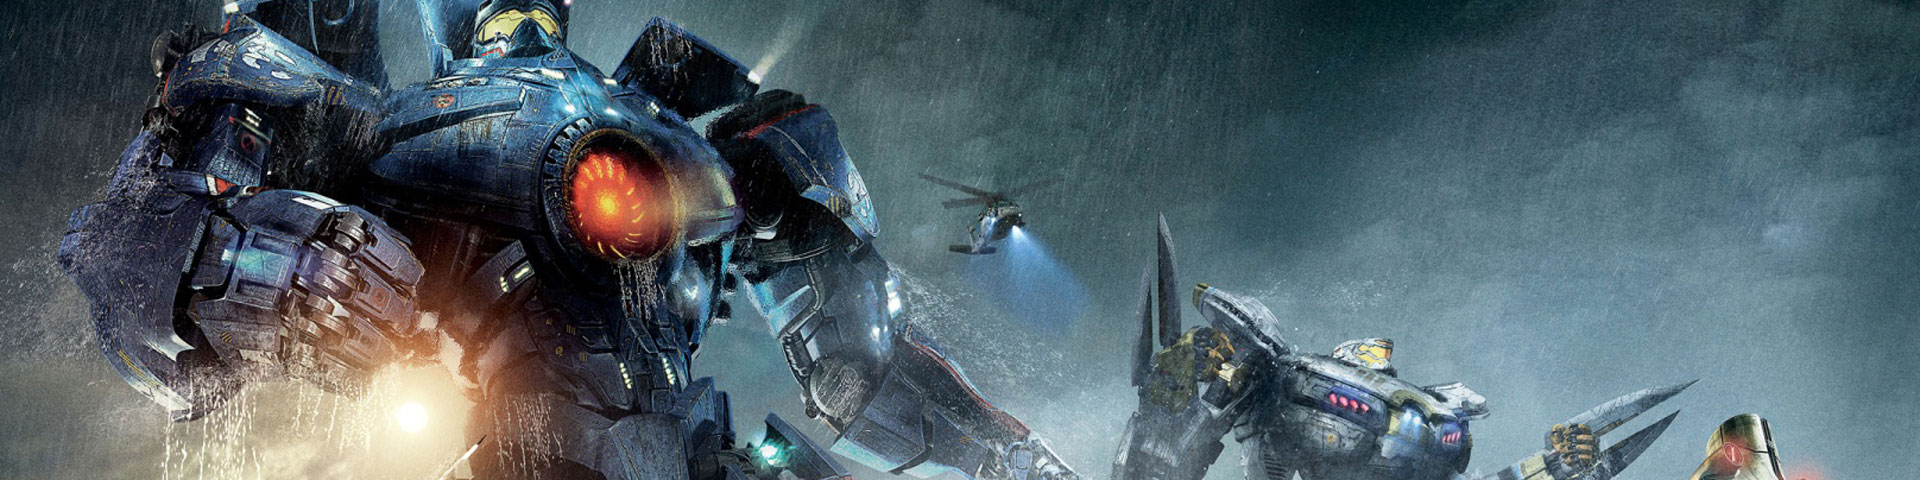 Three giant robots stand in a rain storm, ready to fight anything.